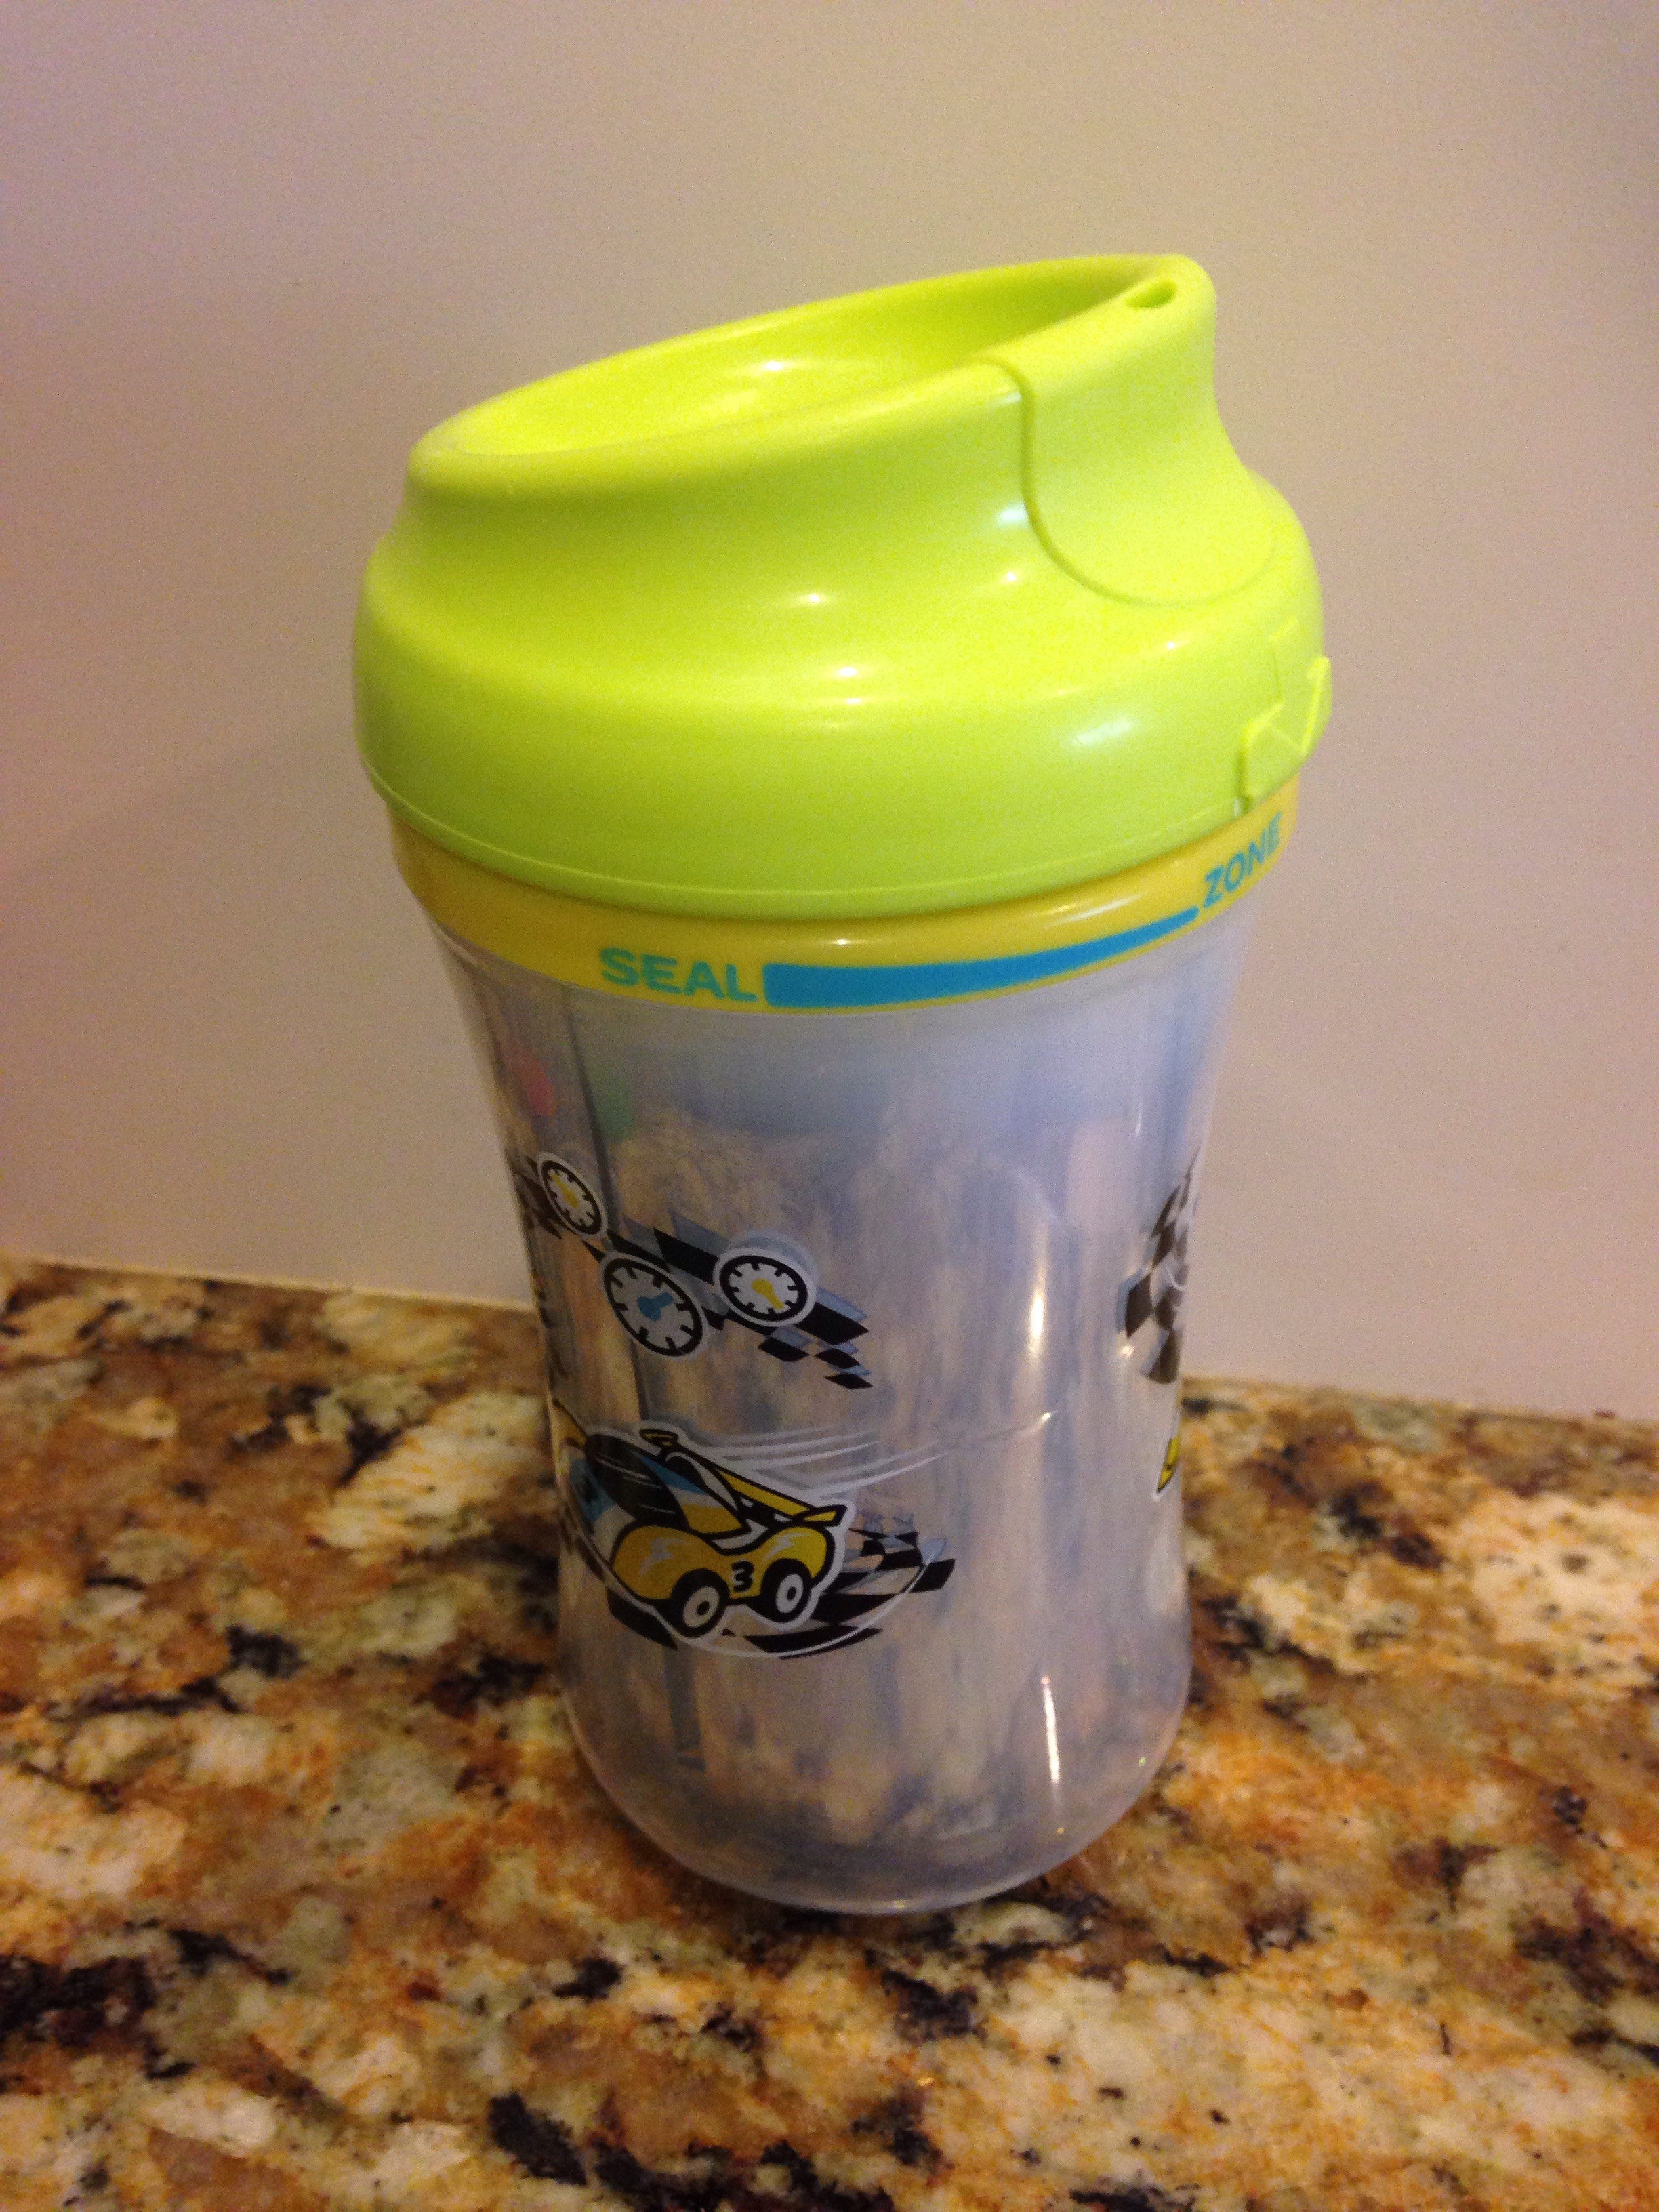 hard spout sippy cup